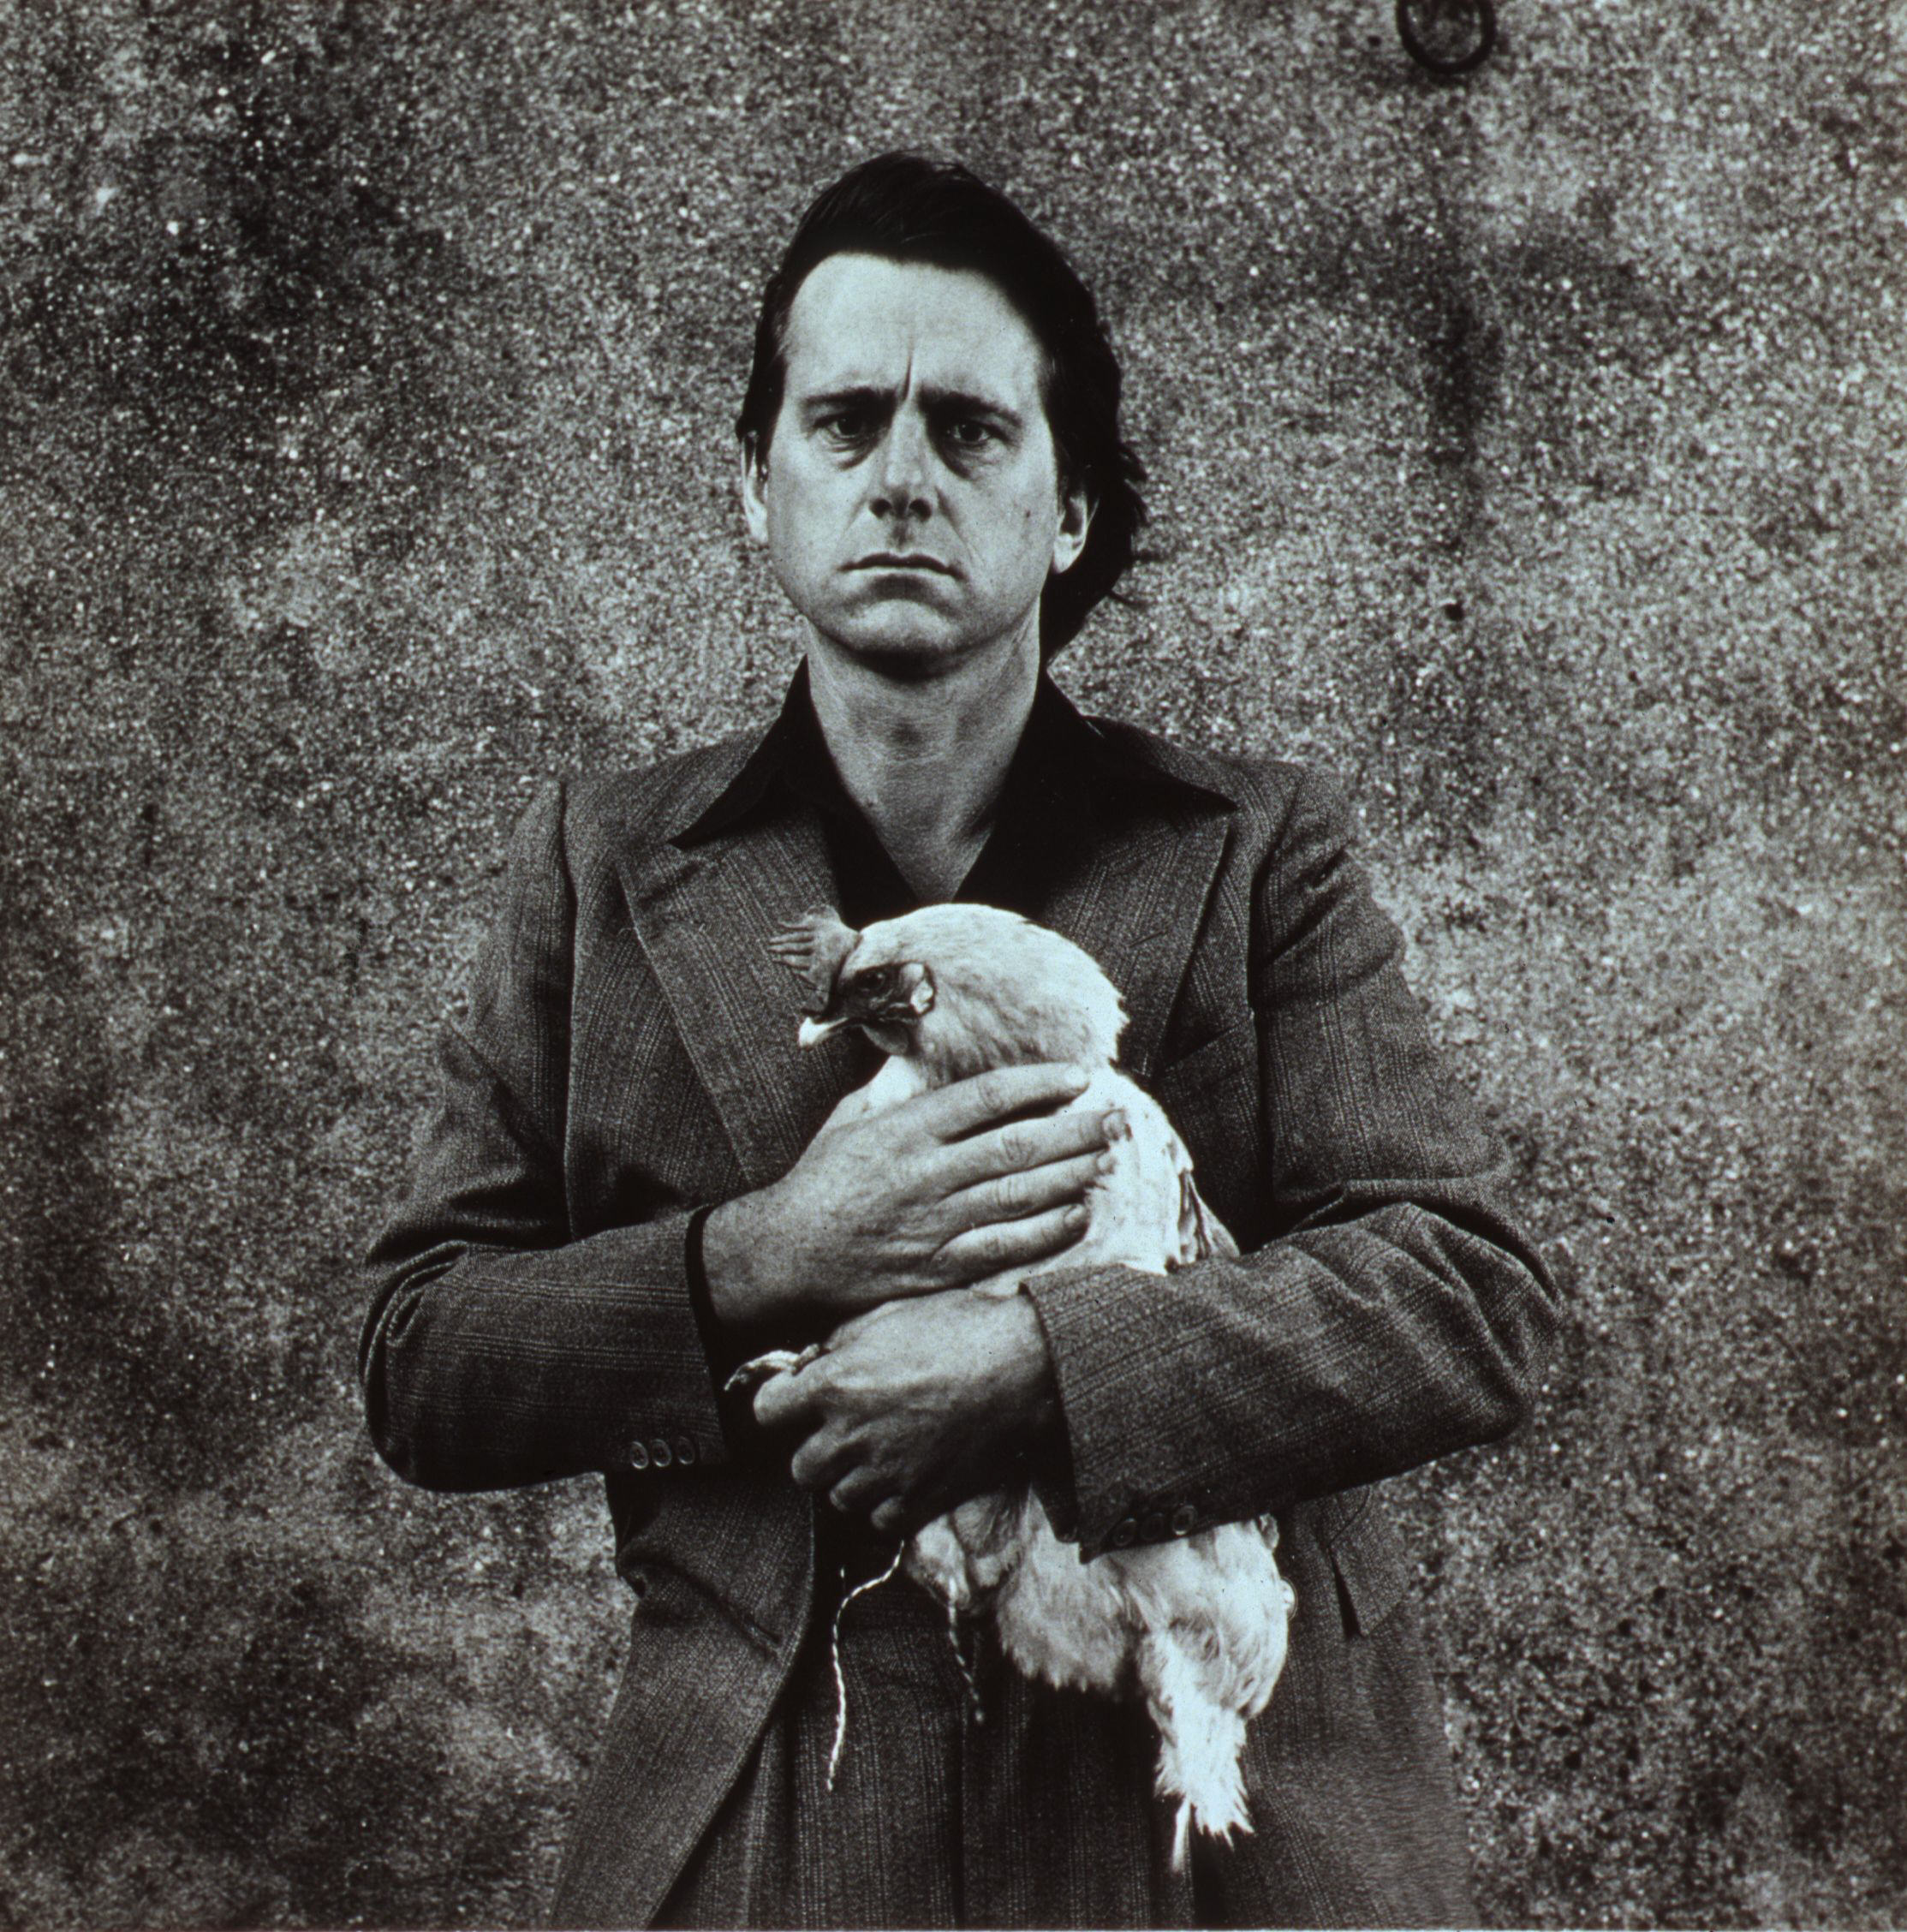 <p>Peter Peryer, <i>Self portrait 1977</i>,<i>&nbsp;</i>1977, black and white photograph, silver bromide print,&nbsp;<span style="color: rgb(0, 0, 0); font-family: Theinhardt, Arial, sans-serif; font-size: 16px;">Auckland Art Gallery Toi o Tāmaki, purchased 1981</span></p>
